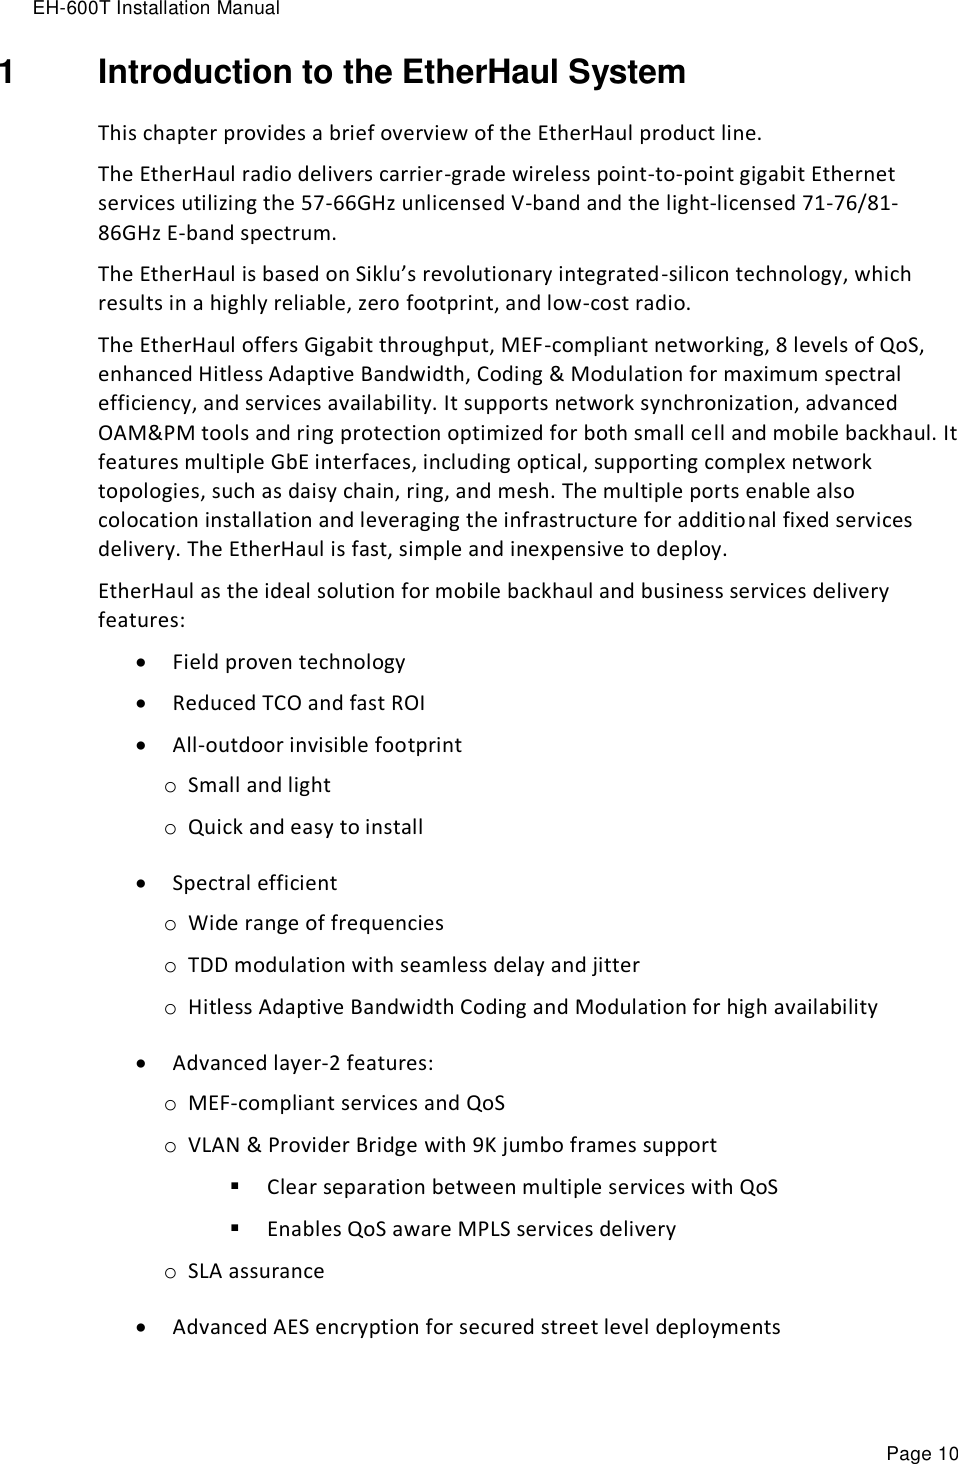 EH-600T Installation Manual Page 10 1  Introduction to the EtherHaul System This chapter provides a brief overview of the EtherHaul product line. The EtherHaul radio delivers carrier-grade wireless point-to-point gigabit Ethernet services utilizing the 57-66GHz unlicensed V-band and the light-licensed 71-76/81-86GHz E-band spectrum.   The EtherHaul is based on Siklu’s revolutionary integrated-silicon technology, which results in a highly reliable, zero footprint, and low-cost radio. The EtherHaul offers Gigabit throughput, MEF-compliant networking, 8 levels of QoS, enhanced Hitless Adaptive Bandwidth, Coding &amp; Modulation for maximum spectral efficiency, and services availability. It supports network synchronization, advanced OAM&amp;PM tools and ring protection optimized for both small cell and mobile backhaul. It features multiple GbE interfaces, including optical, supporting complex network topologies, such as daisy chain, ring, and mesh. The multiple ports enable also colocation installation and leveraging the infrastructure for additional fixed services delivery. The EtherHaul is fast, simple and inexpensive to deploy.   EtherHaul as the ideal solution for mobile backhaul and business services delivery features:  Field proven technology   Reduced TCO and fast ROI  All-outdoor invisible footprint o Small and light o Quick and easy to install  Spectral efficient  o Wide range of frequencies o TDD modulation with seamless delay and jitter o Hitless Adaptive Bandwidth Coding and Modulation for high availability   Advanced layer-2 features: o MEF-compliant services and QoS o VLAN &amp; Provider Bridge with 9K jumbo frames support  Clear separation between multiple services with QoS  Enables QoS aware MPLS services delivery  o SLA assurance  Advanced AES encryption for secured street level deployments  